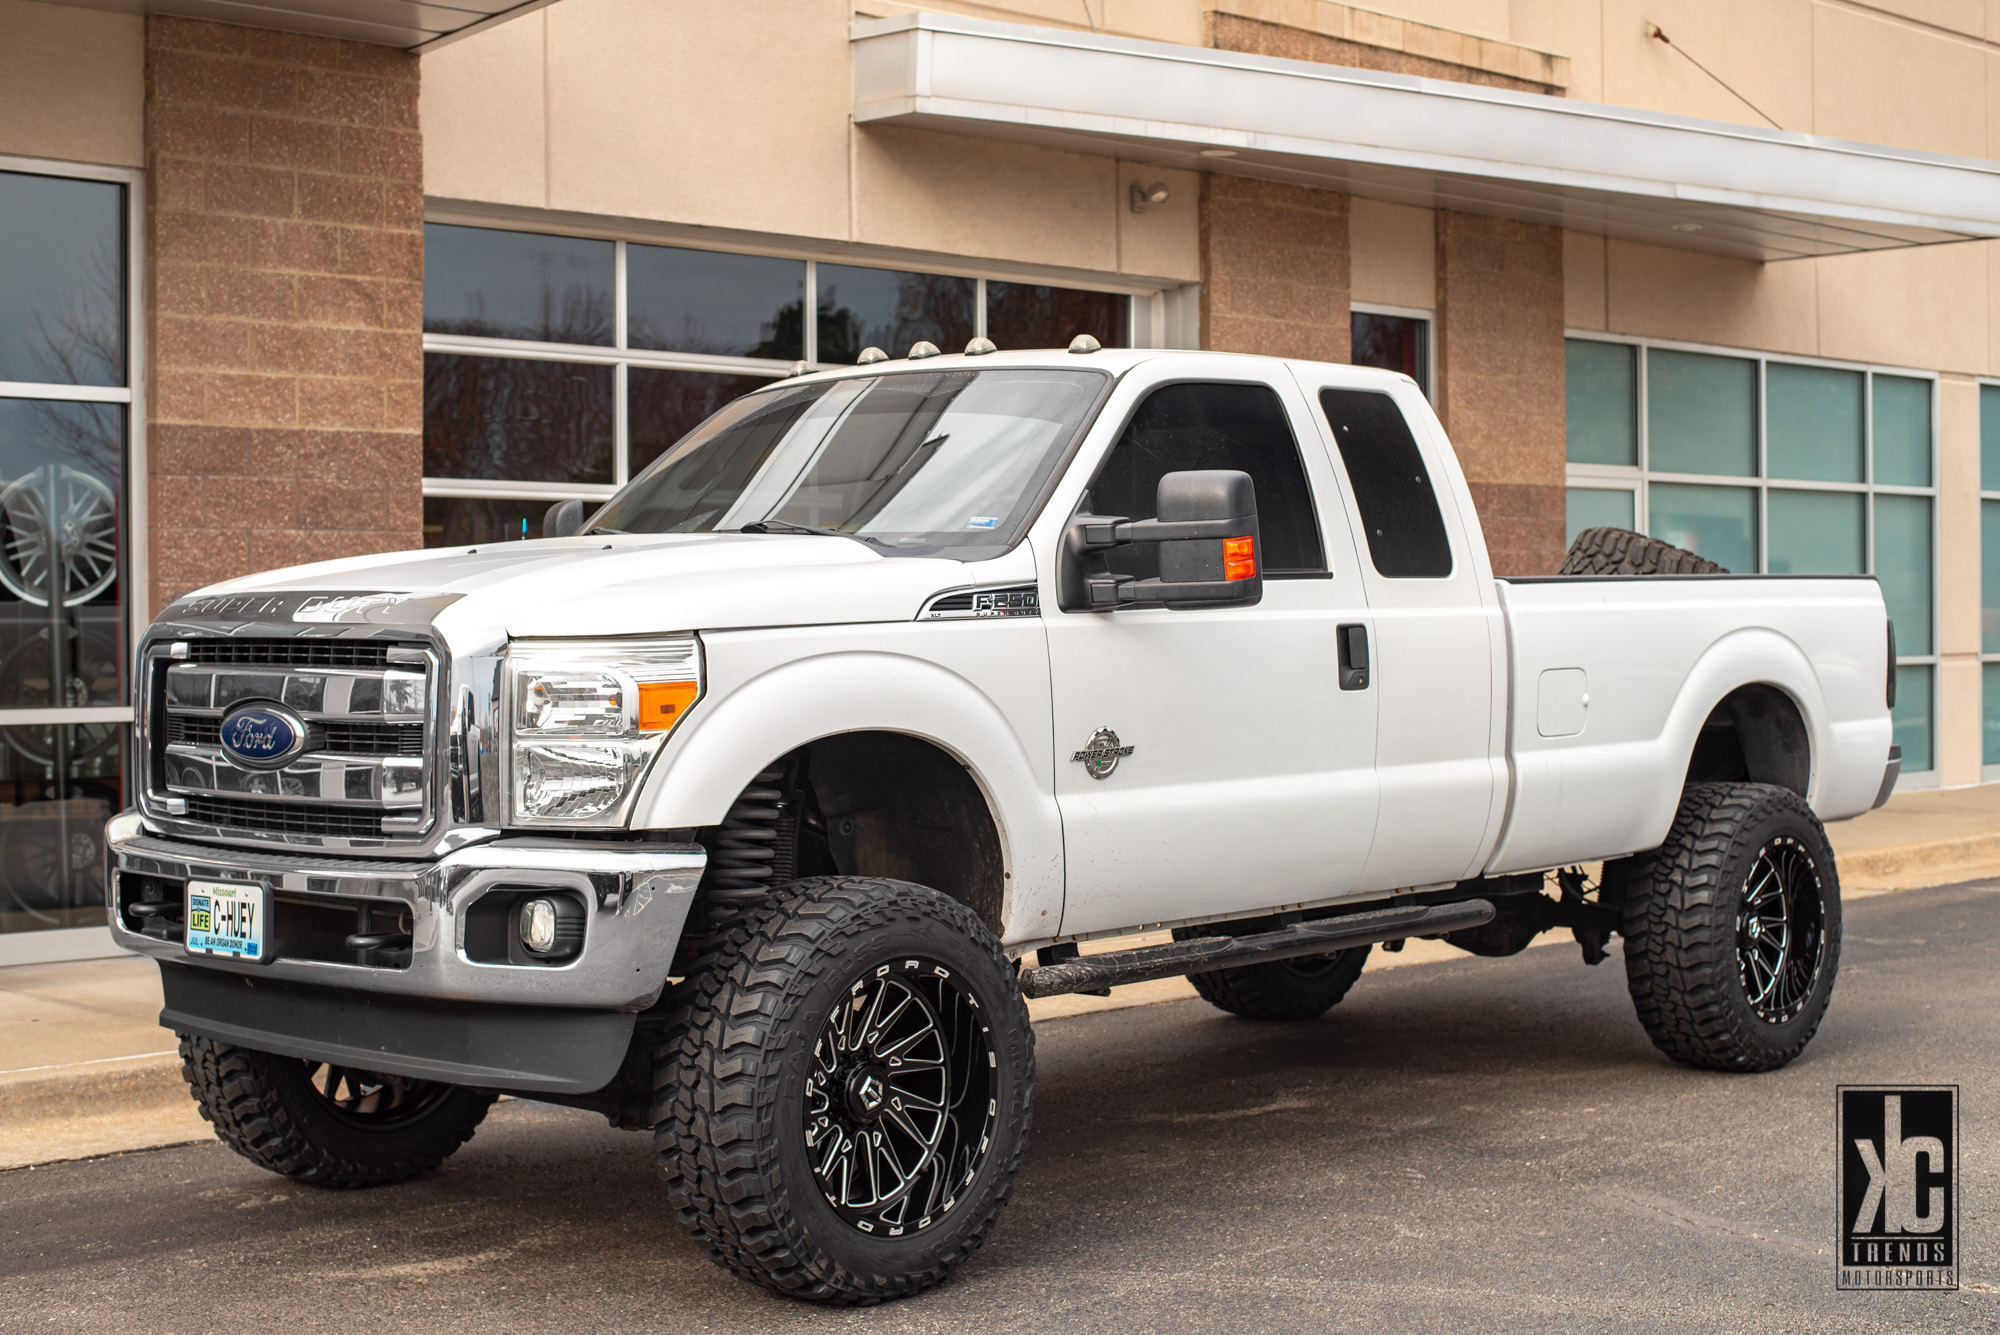  Ford F-250 Super Duty with 